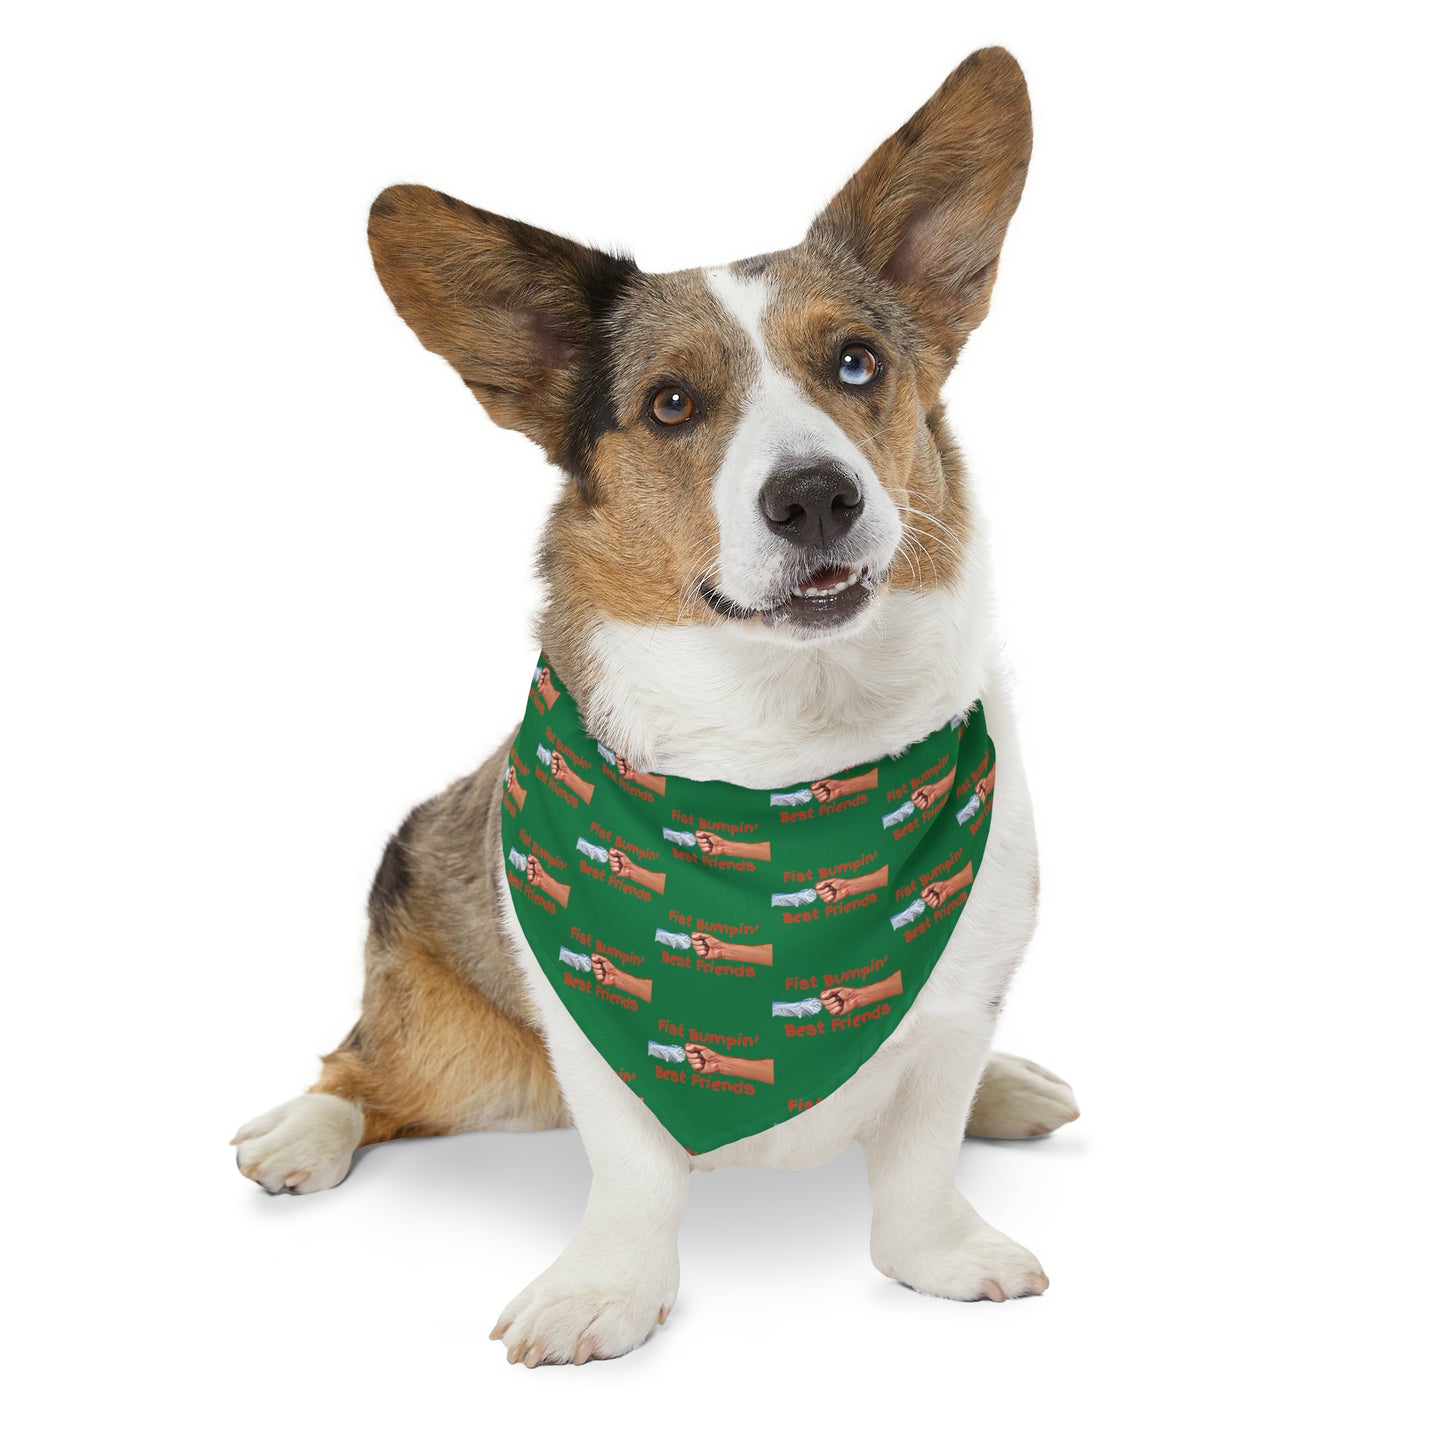 Fist Bumpin’ Best Friends Opie’s Cavalier King Charles Spaniel Pet Bandana Collar Green with KC Red lettering.